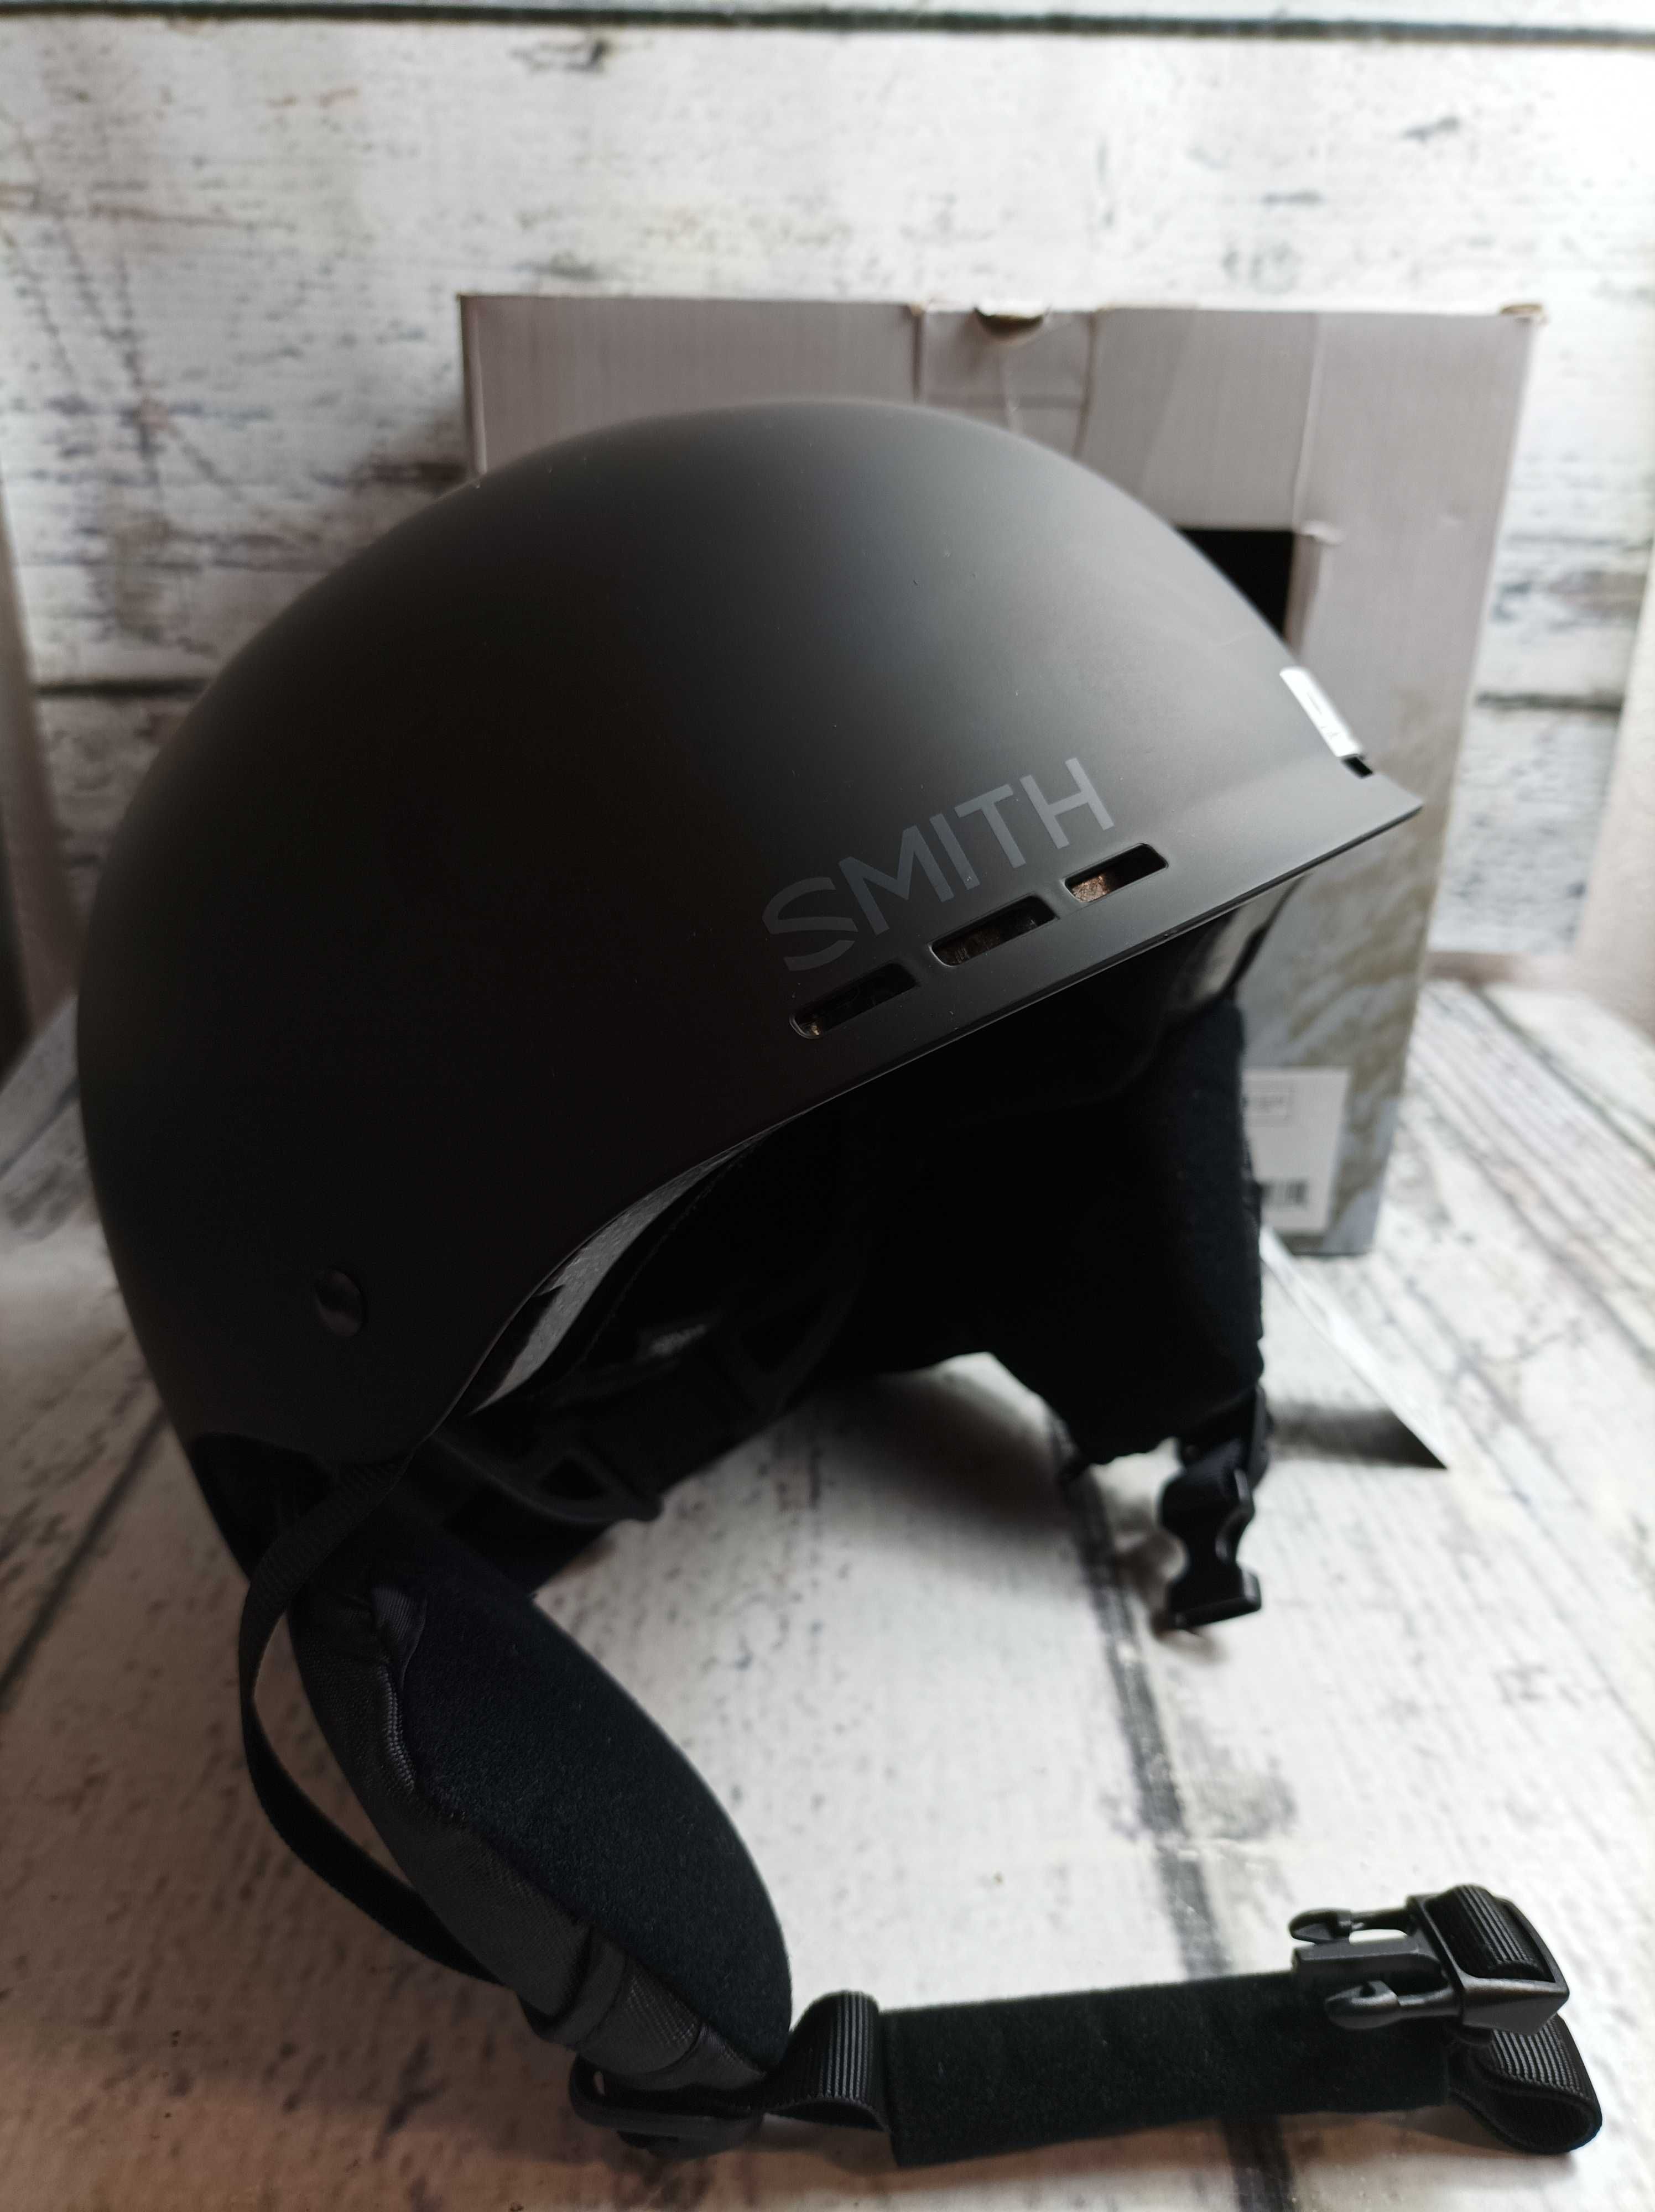 Kask SMITH Holt Adult M 55-59